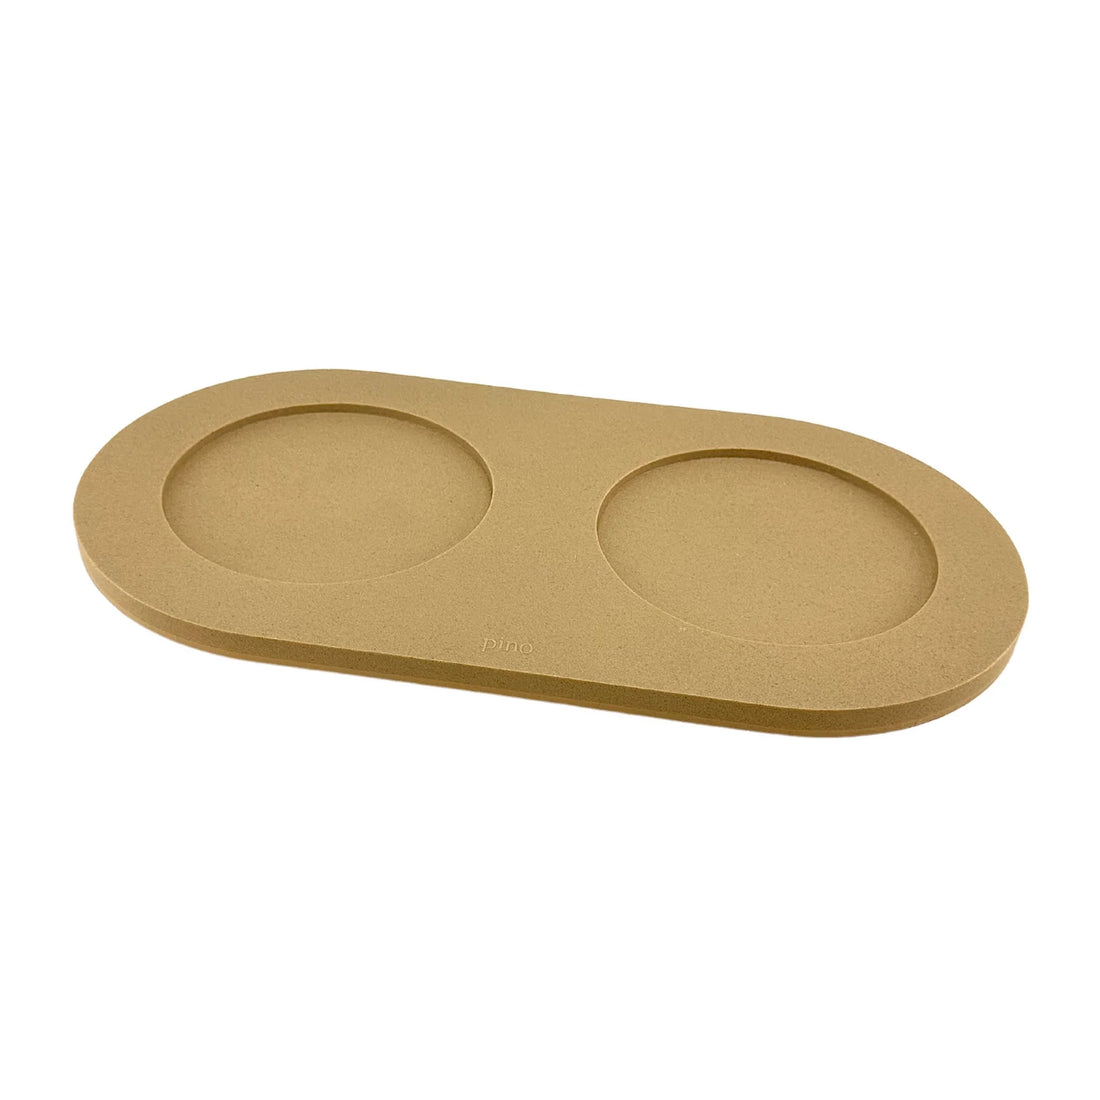 Serving Tray - Camel Brown